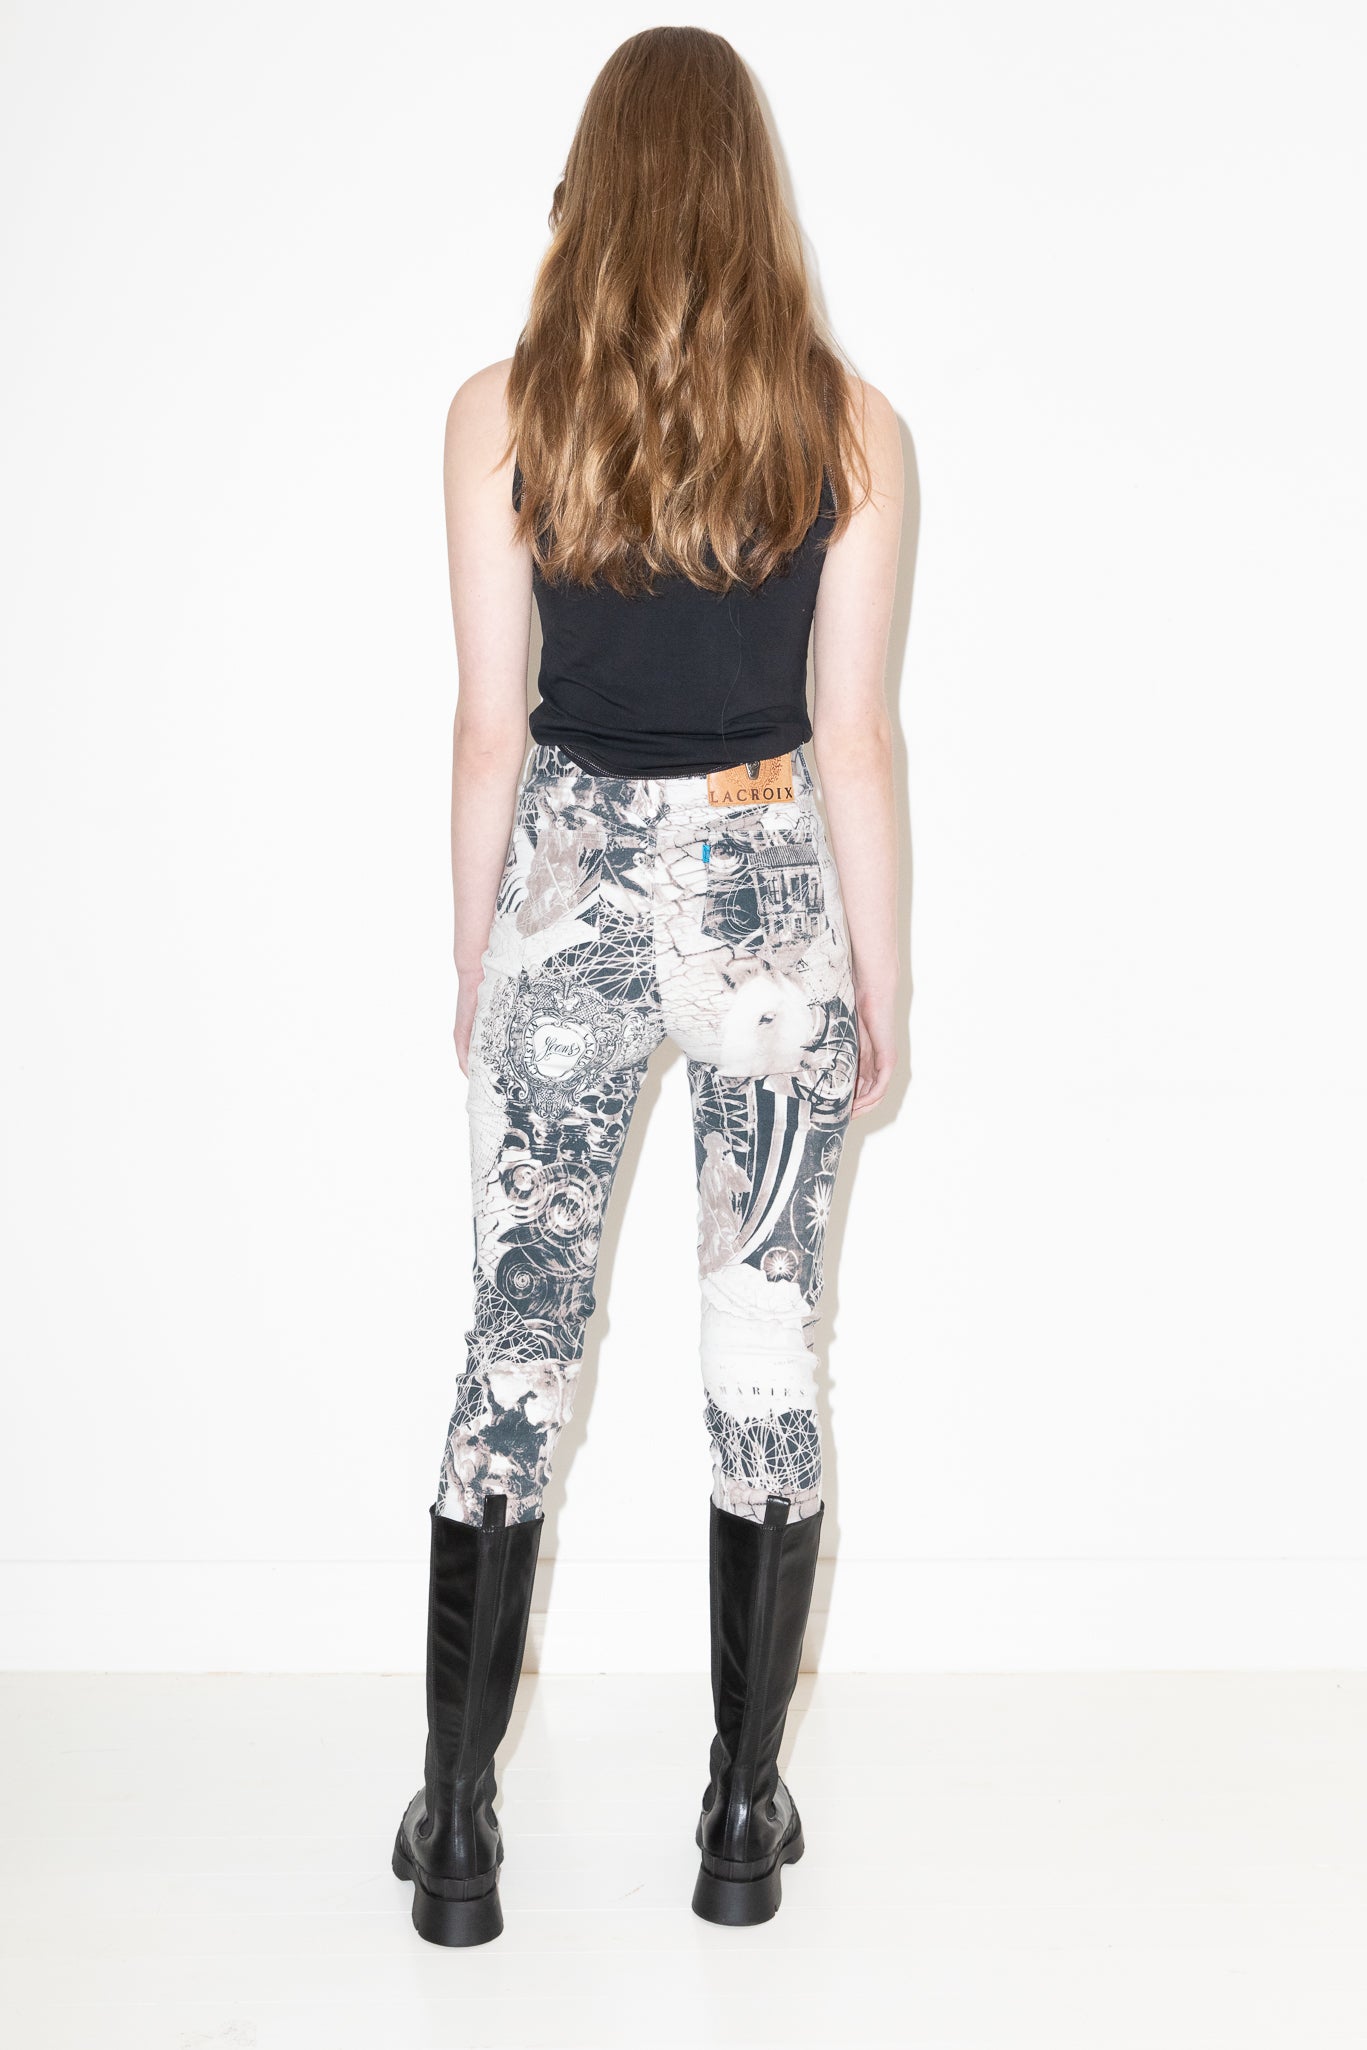 Christian Lacroix <br> 90's high waisted graphic print jeans